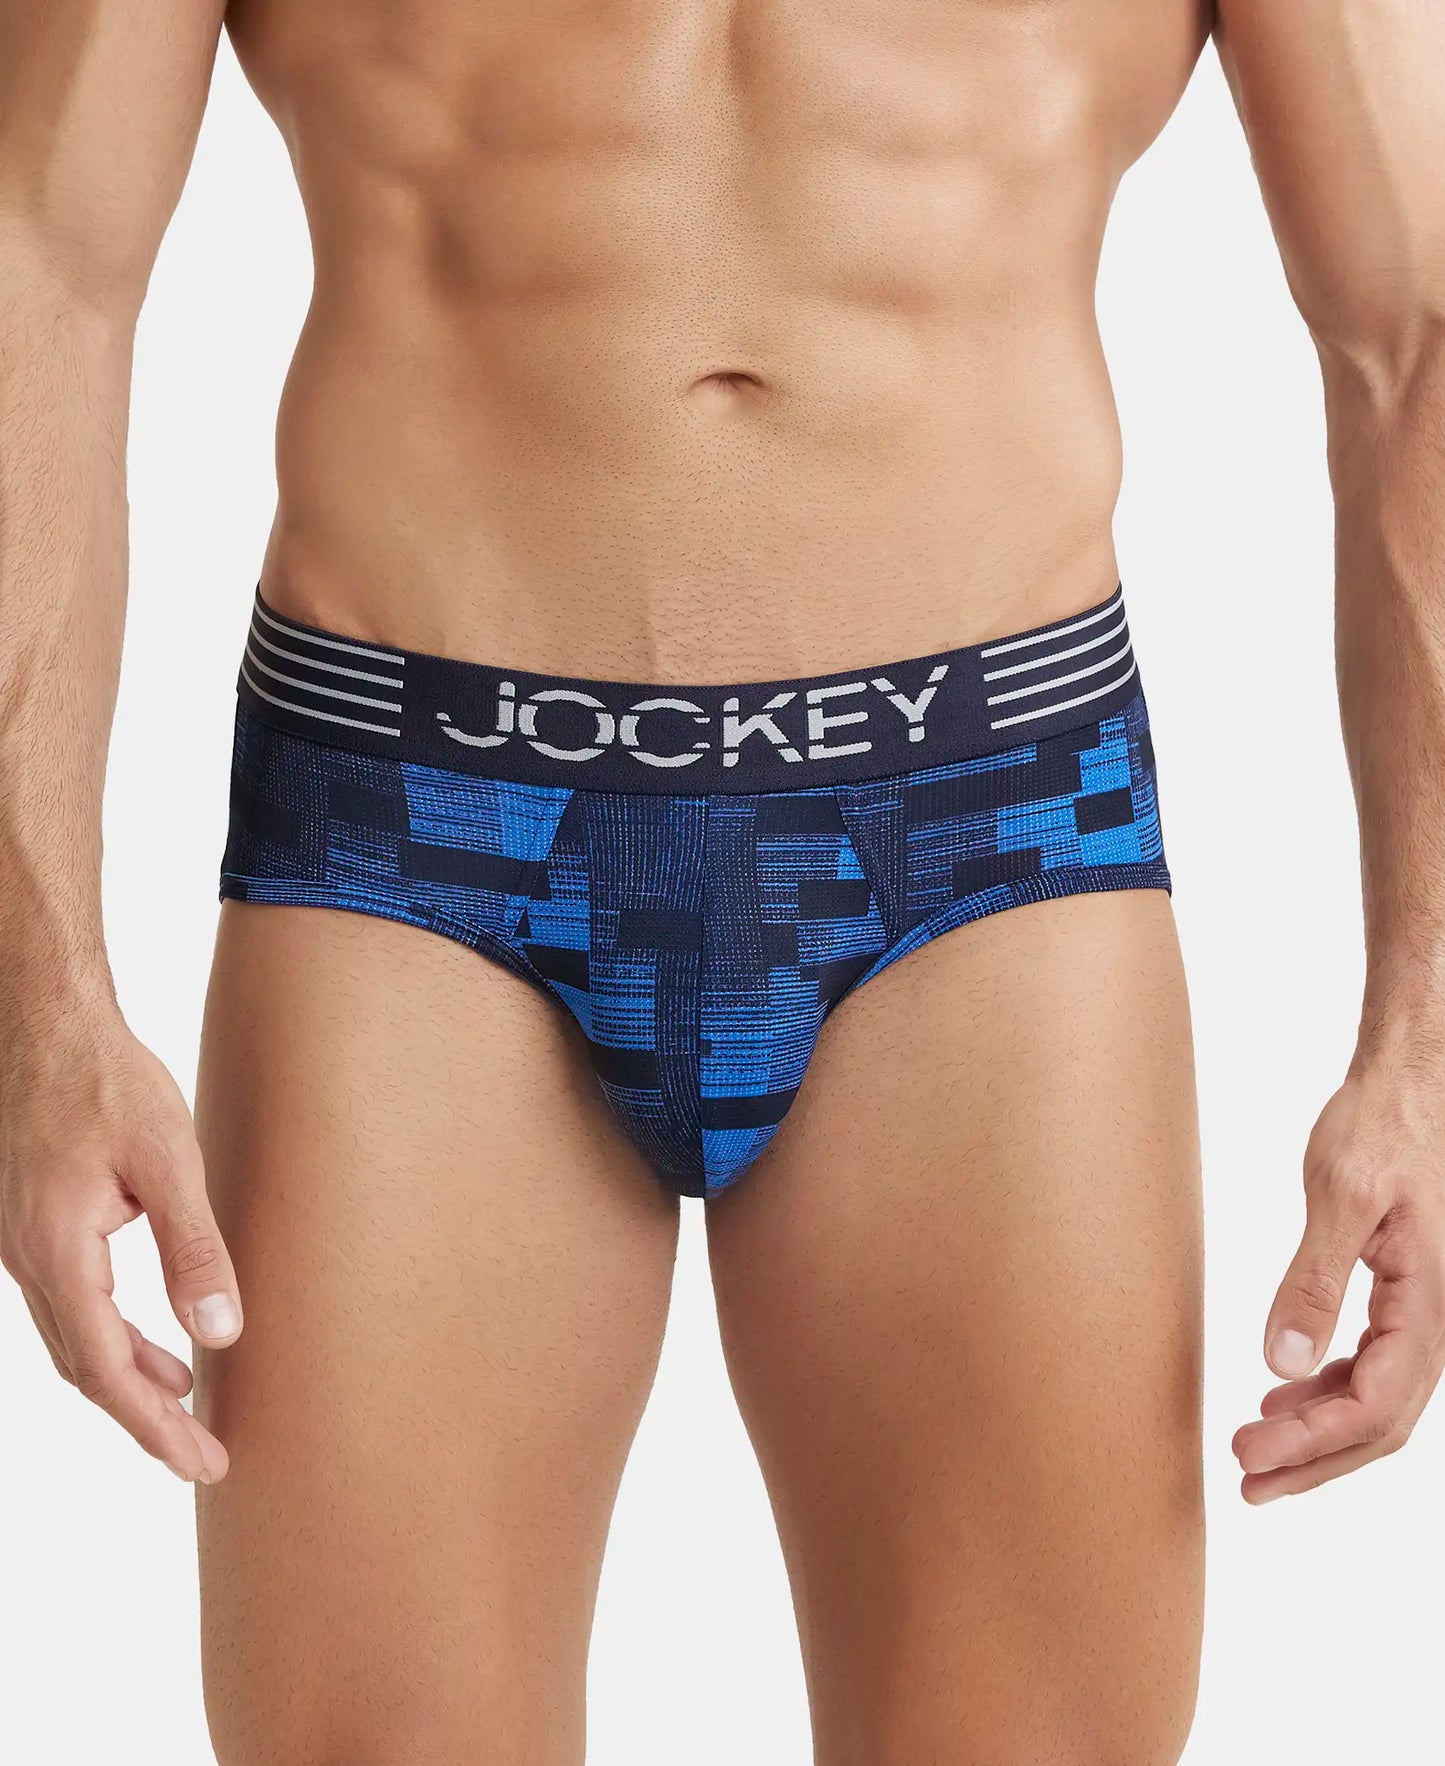 Microfiber Mesh Elastane Printed Performance Brief with StayDry Technology - Move Blue-1